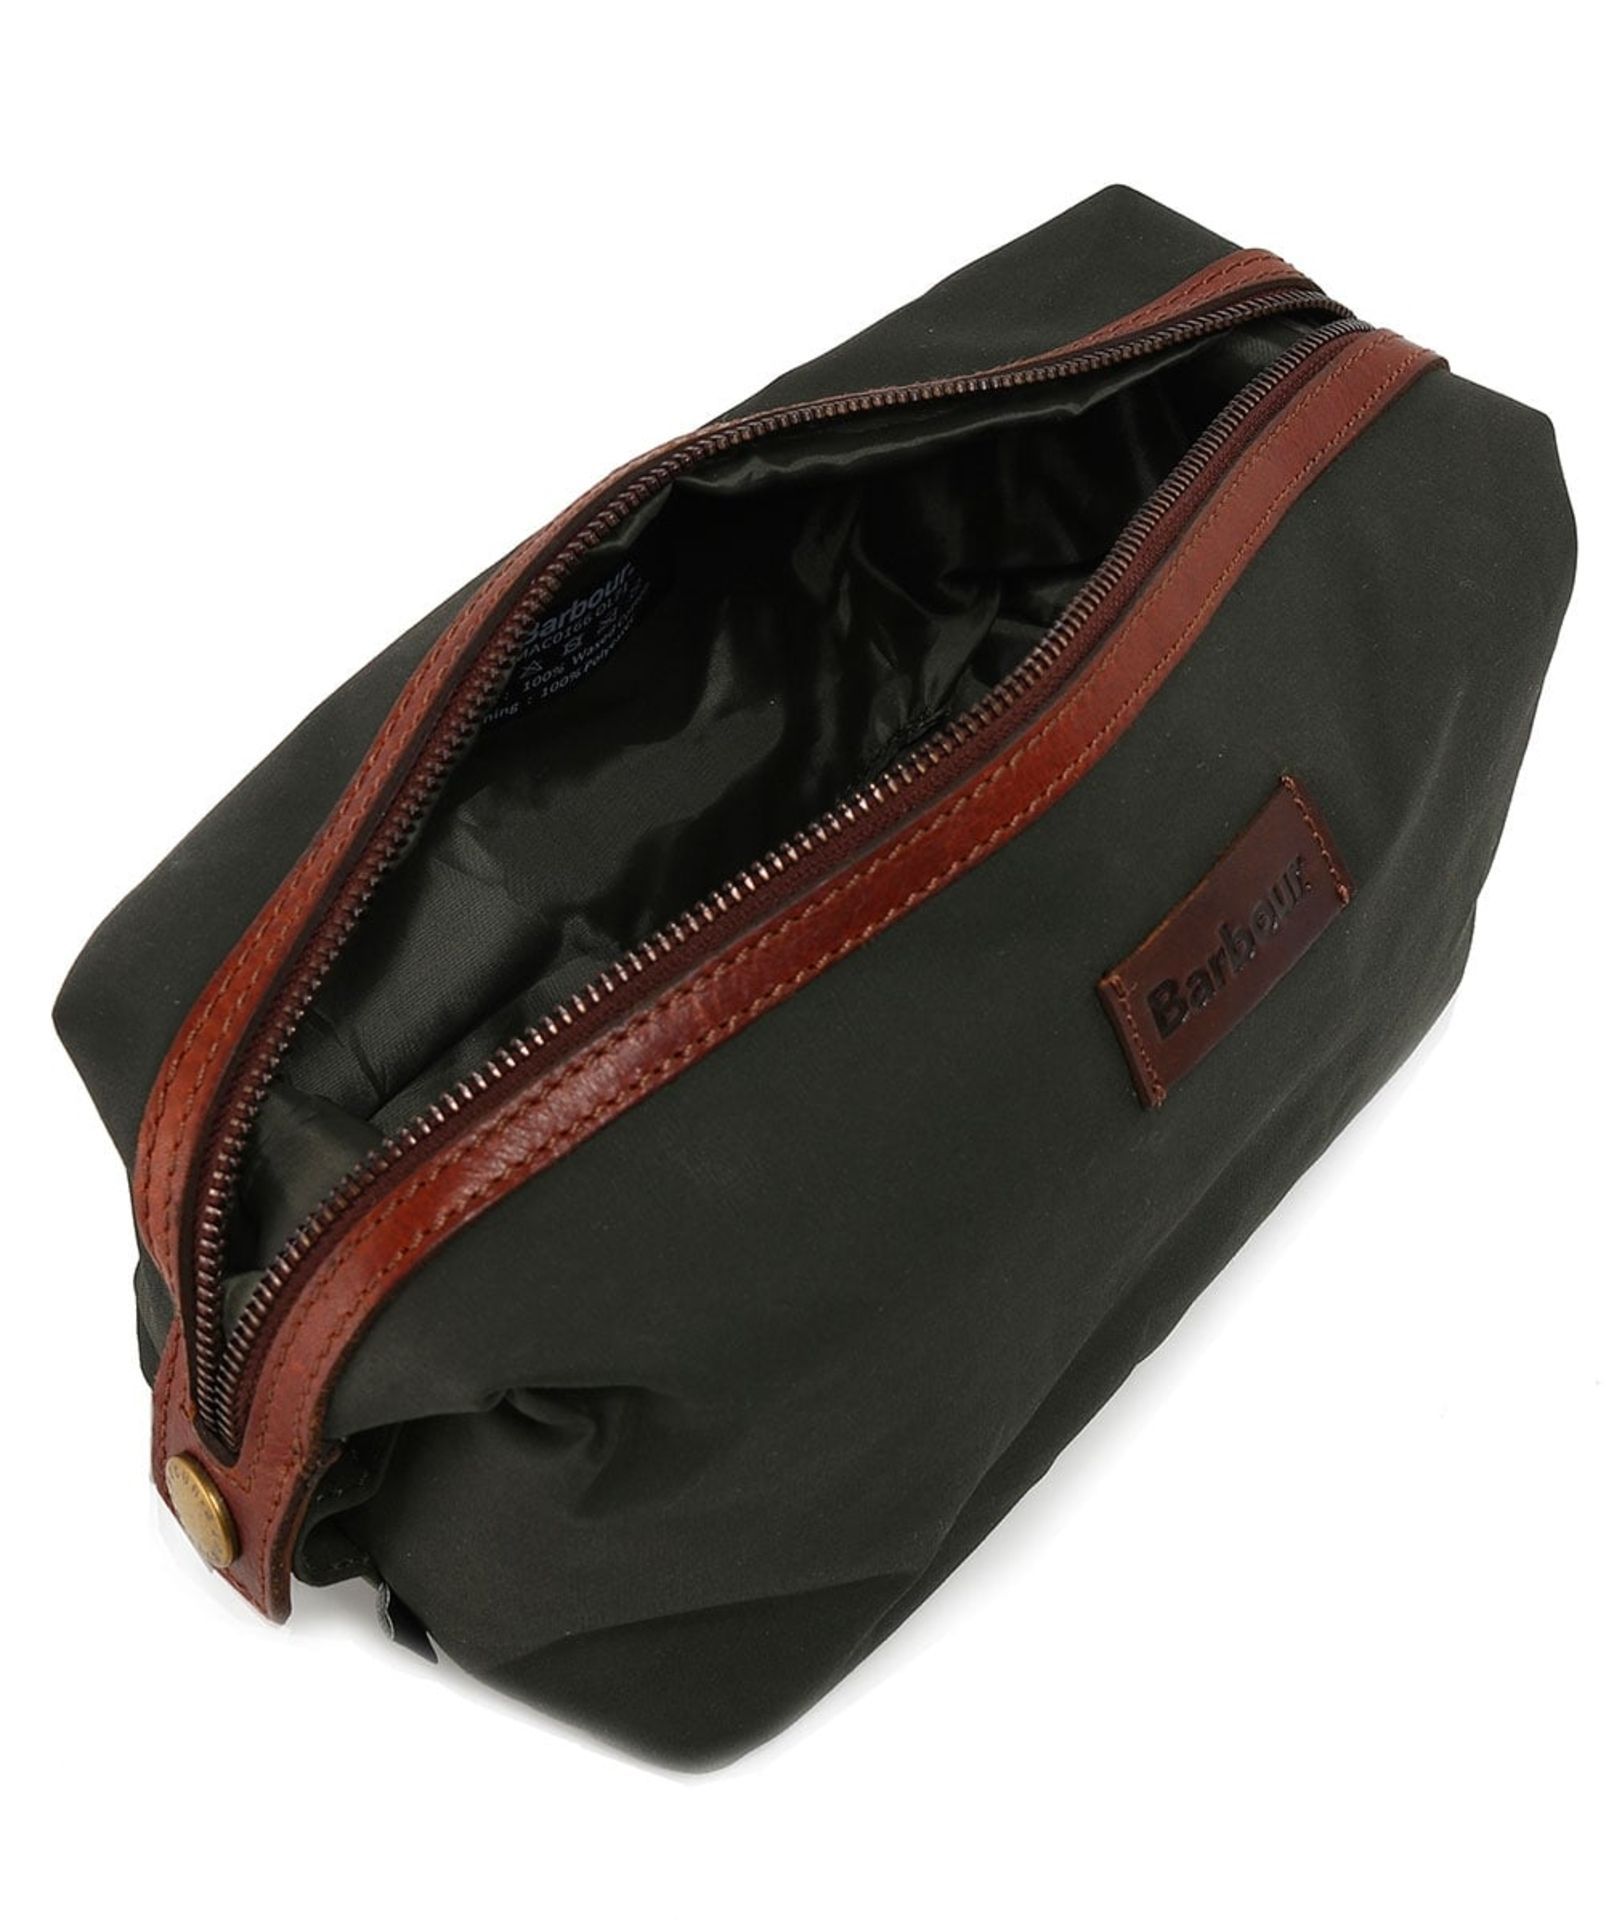 BRAND NEW BARBOUR DRY WAX CONVERTIBLE WASH BAG (5784) RRP £76-10 (353/27)